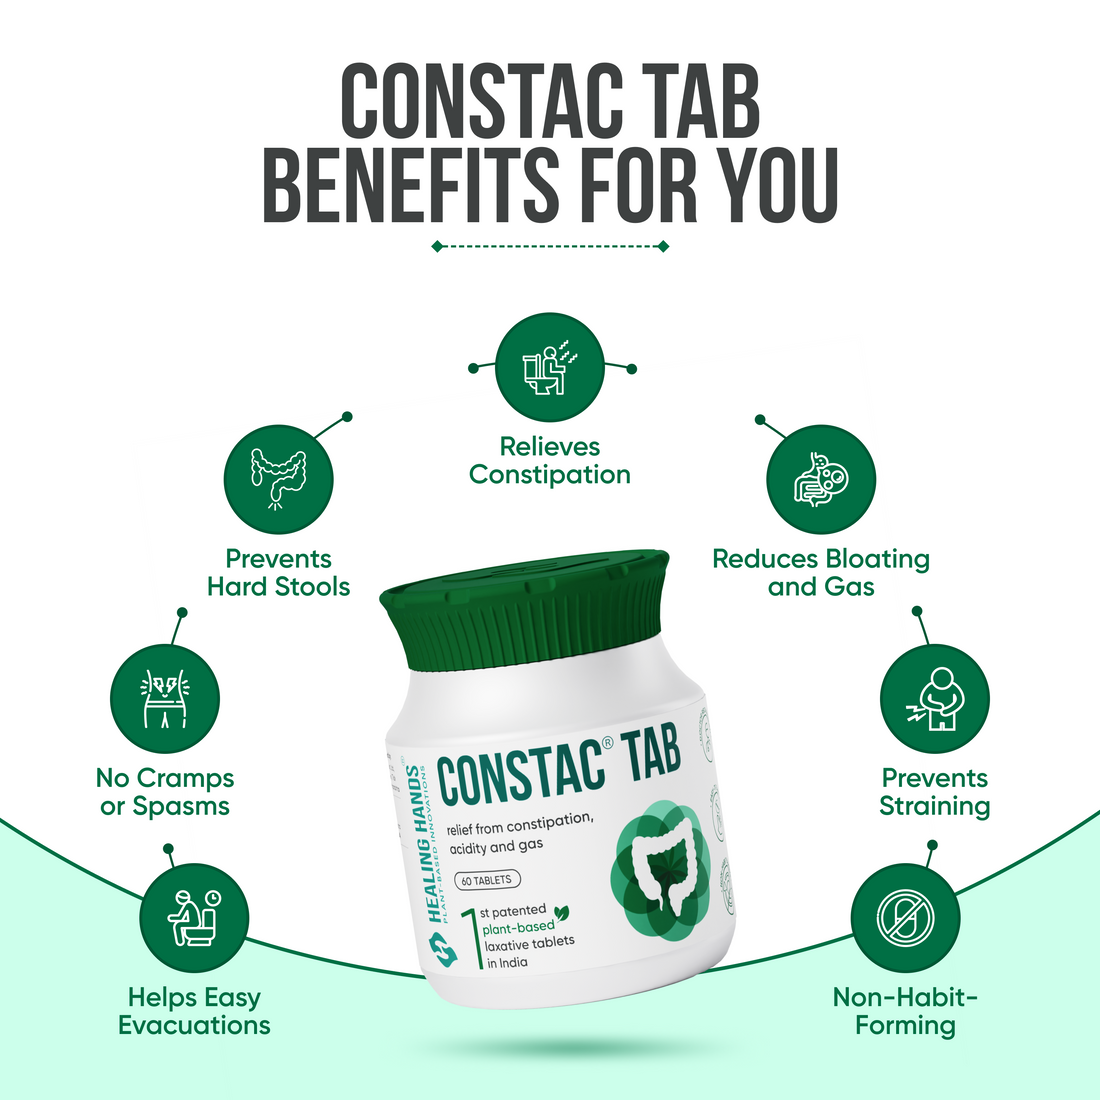 ConstacTab for Constipation I 60 Tablets